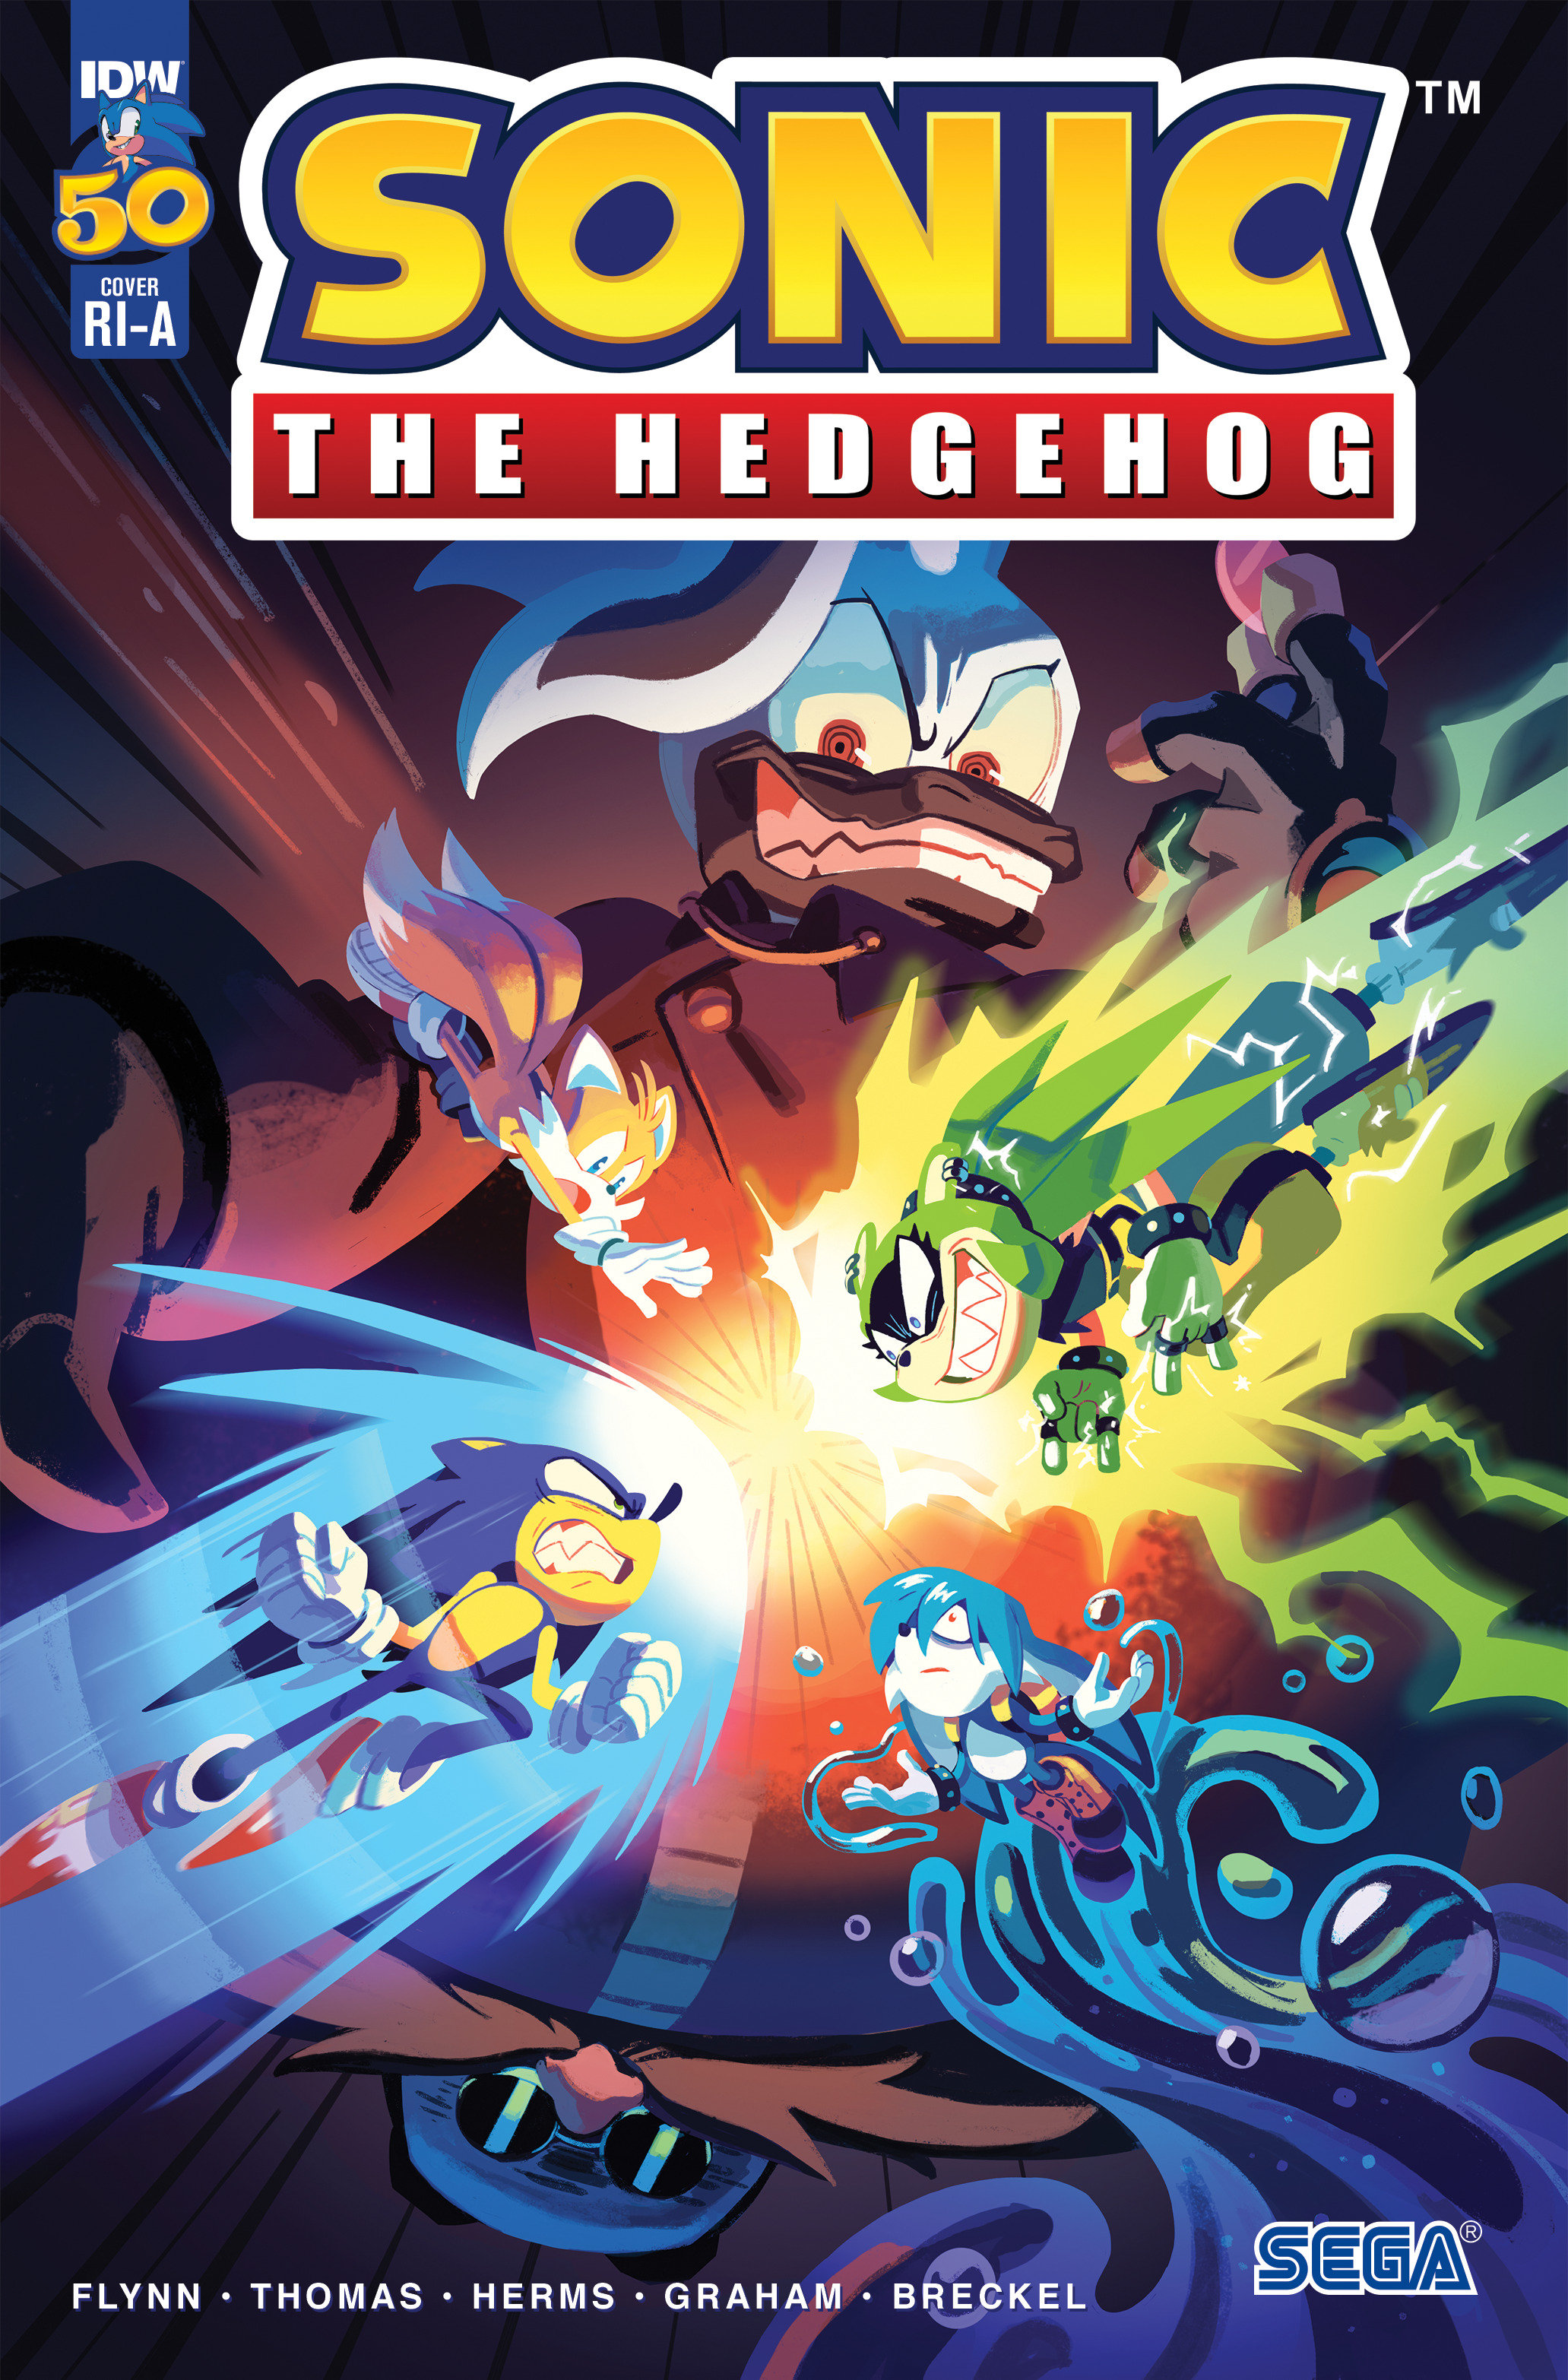 Sonic the Hedgehog #50 1 For 10 Incentive Variant (Fourdraine)